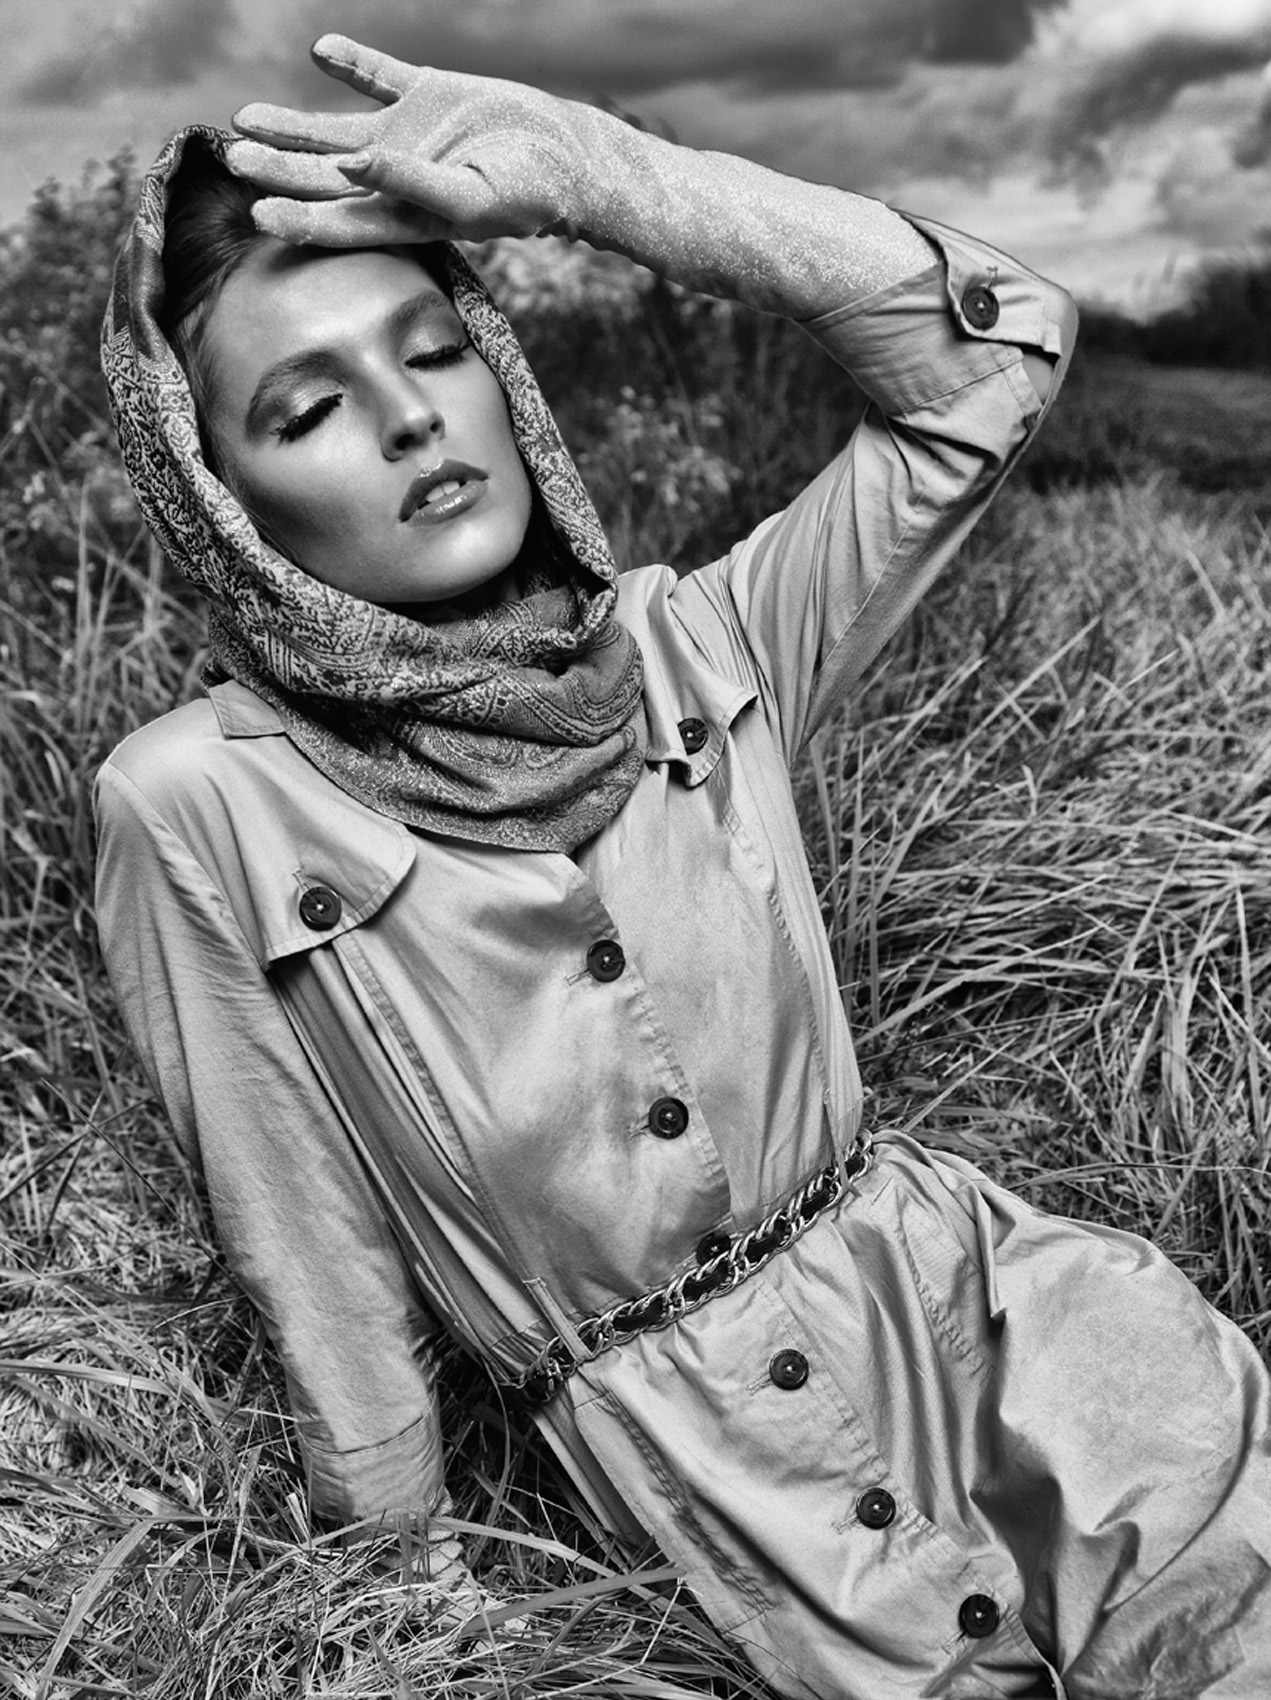 CASTAWAY_Model Megan Wearing Rain Coat Scarf With Arm Raised And Angled Using Gloved Hand To Shield  Face In Field Of Tall Grass Inclining